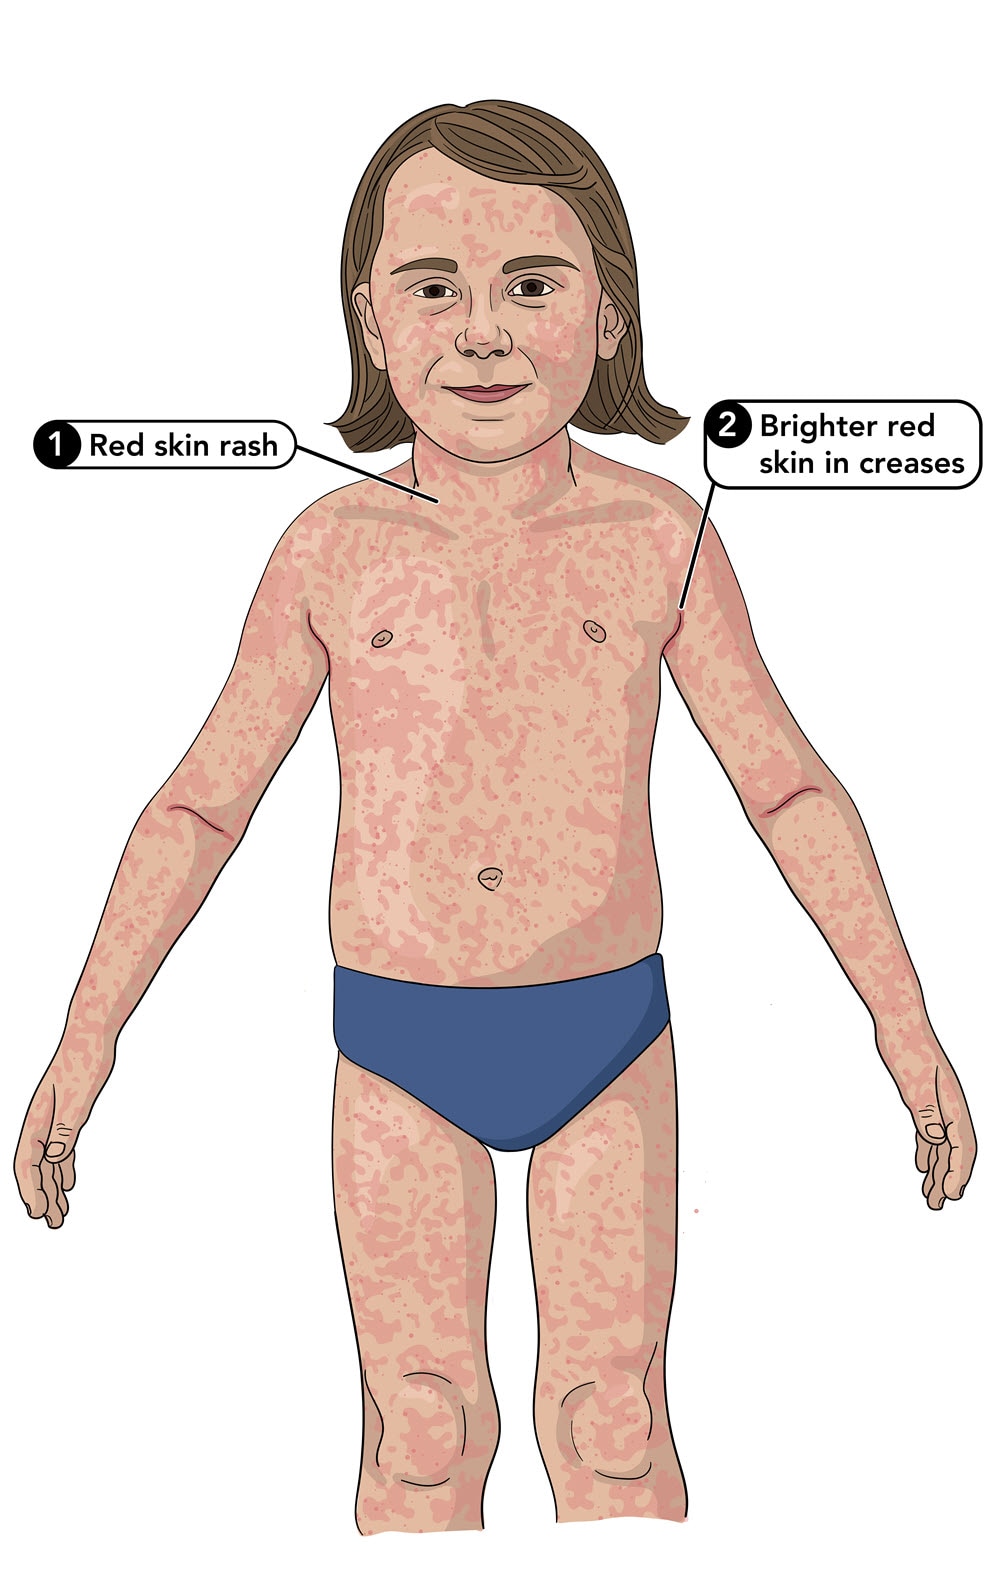 Scarlet fever rash on a small child that also shows pastia lines on skin creases.